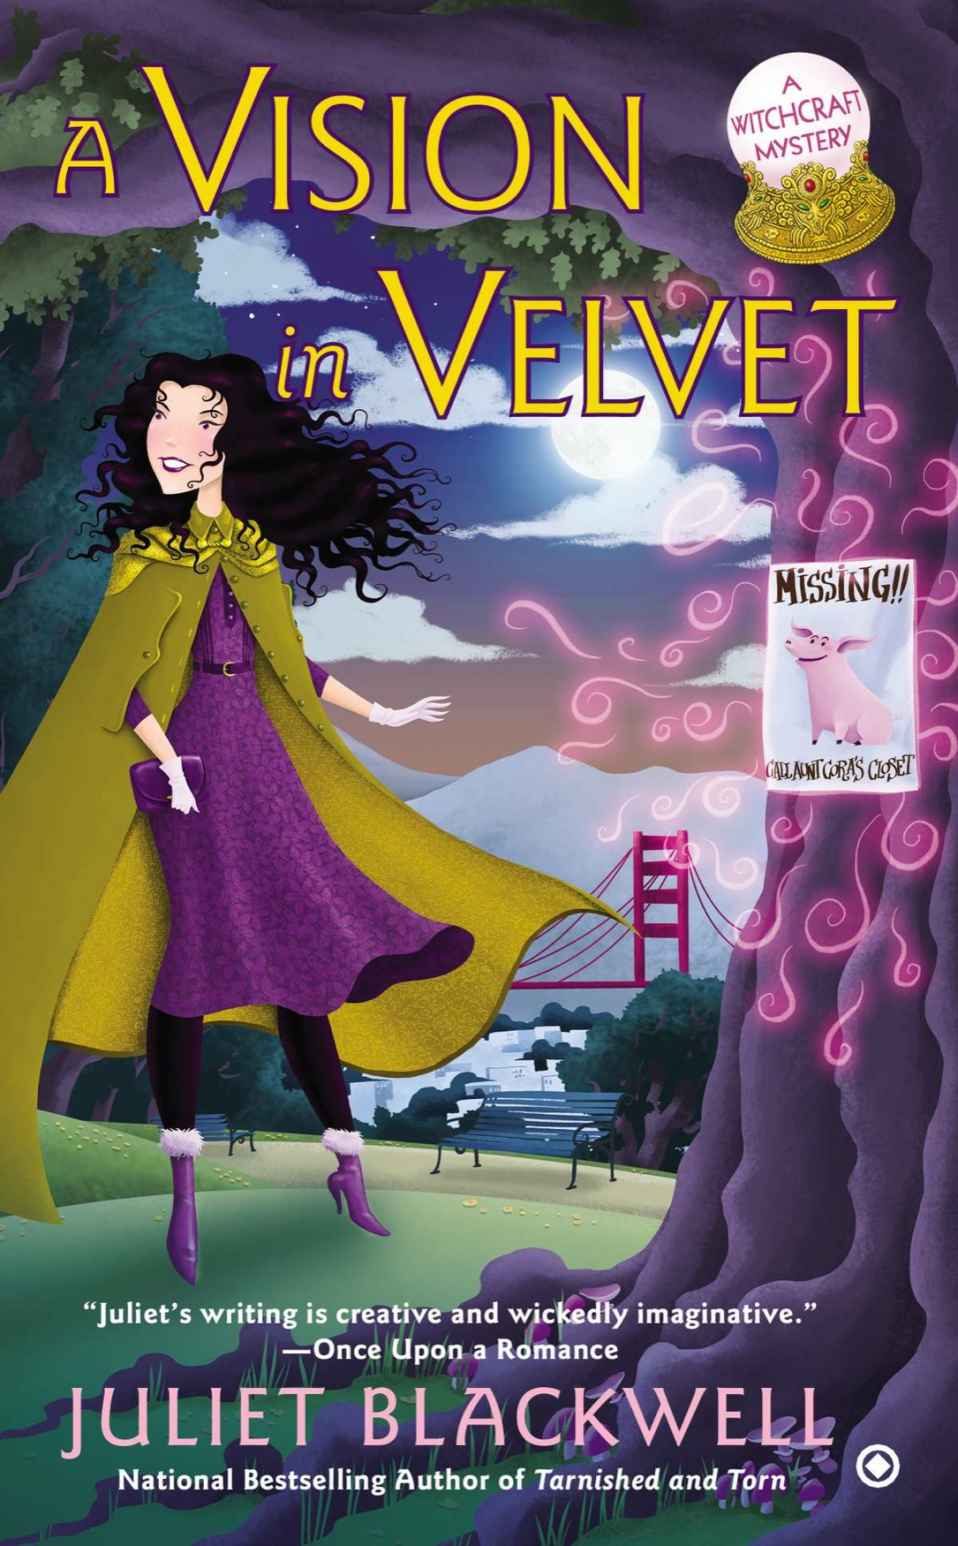 A Vision in Velvet: A Witchcraft Mystery by Juliet Blackwell